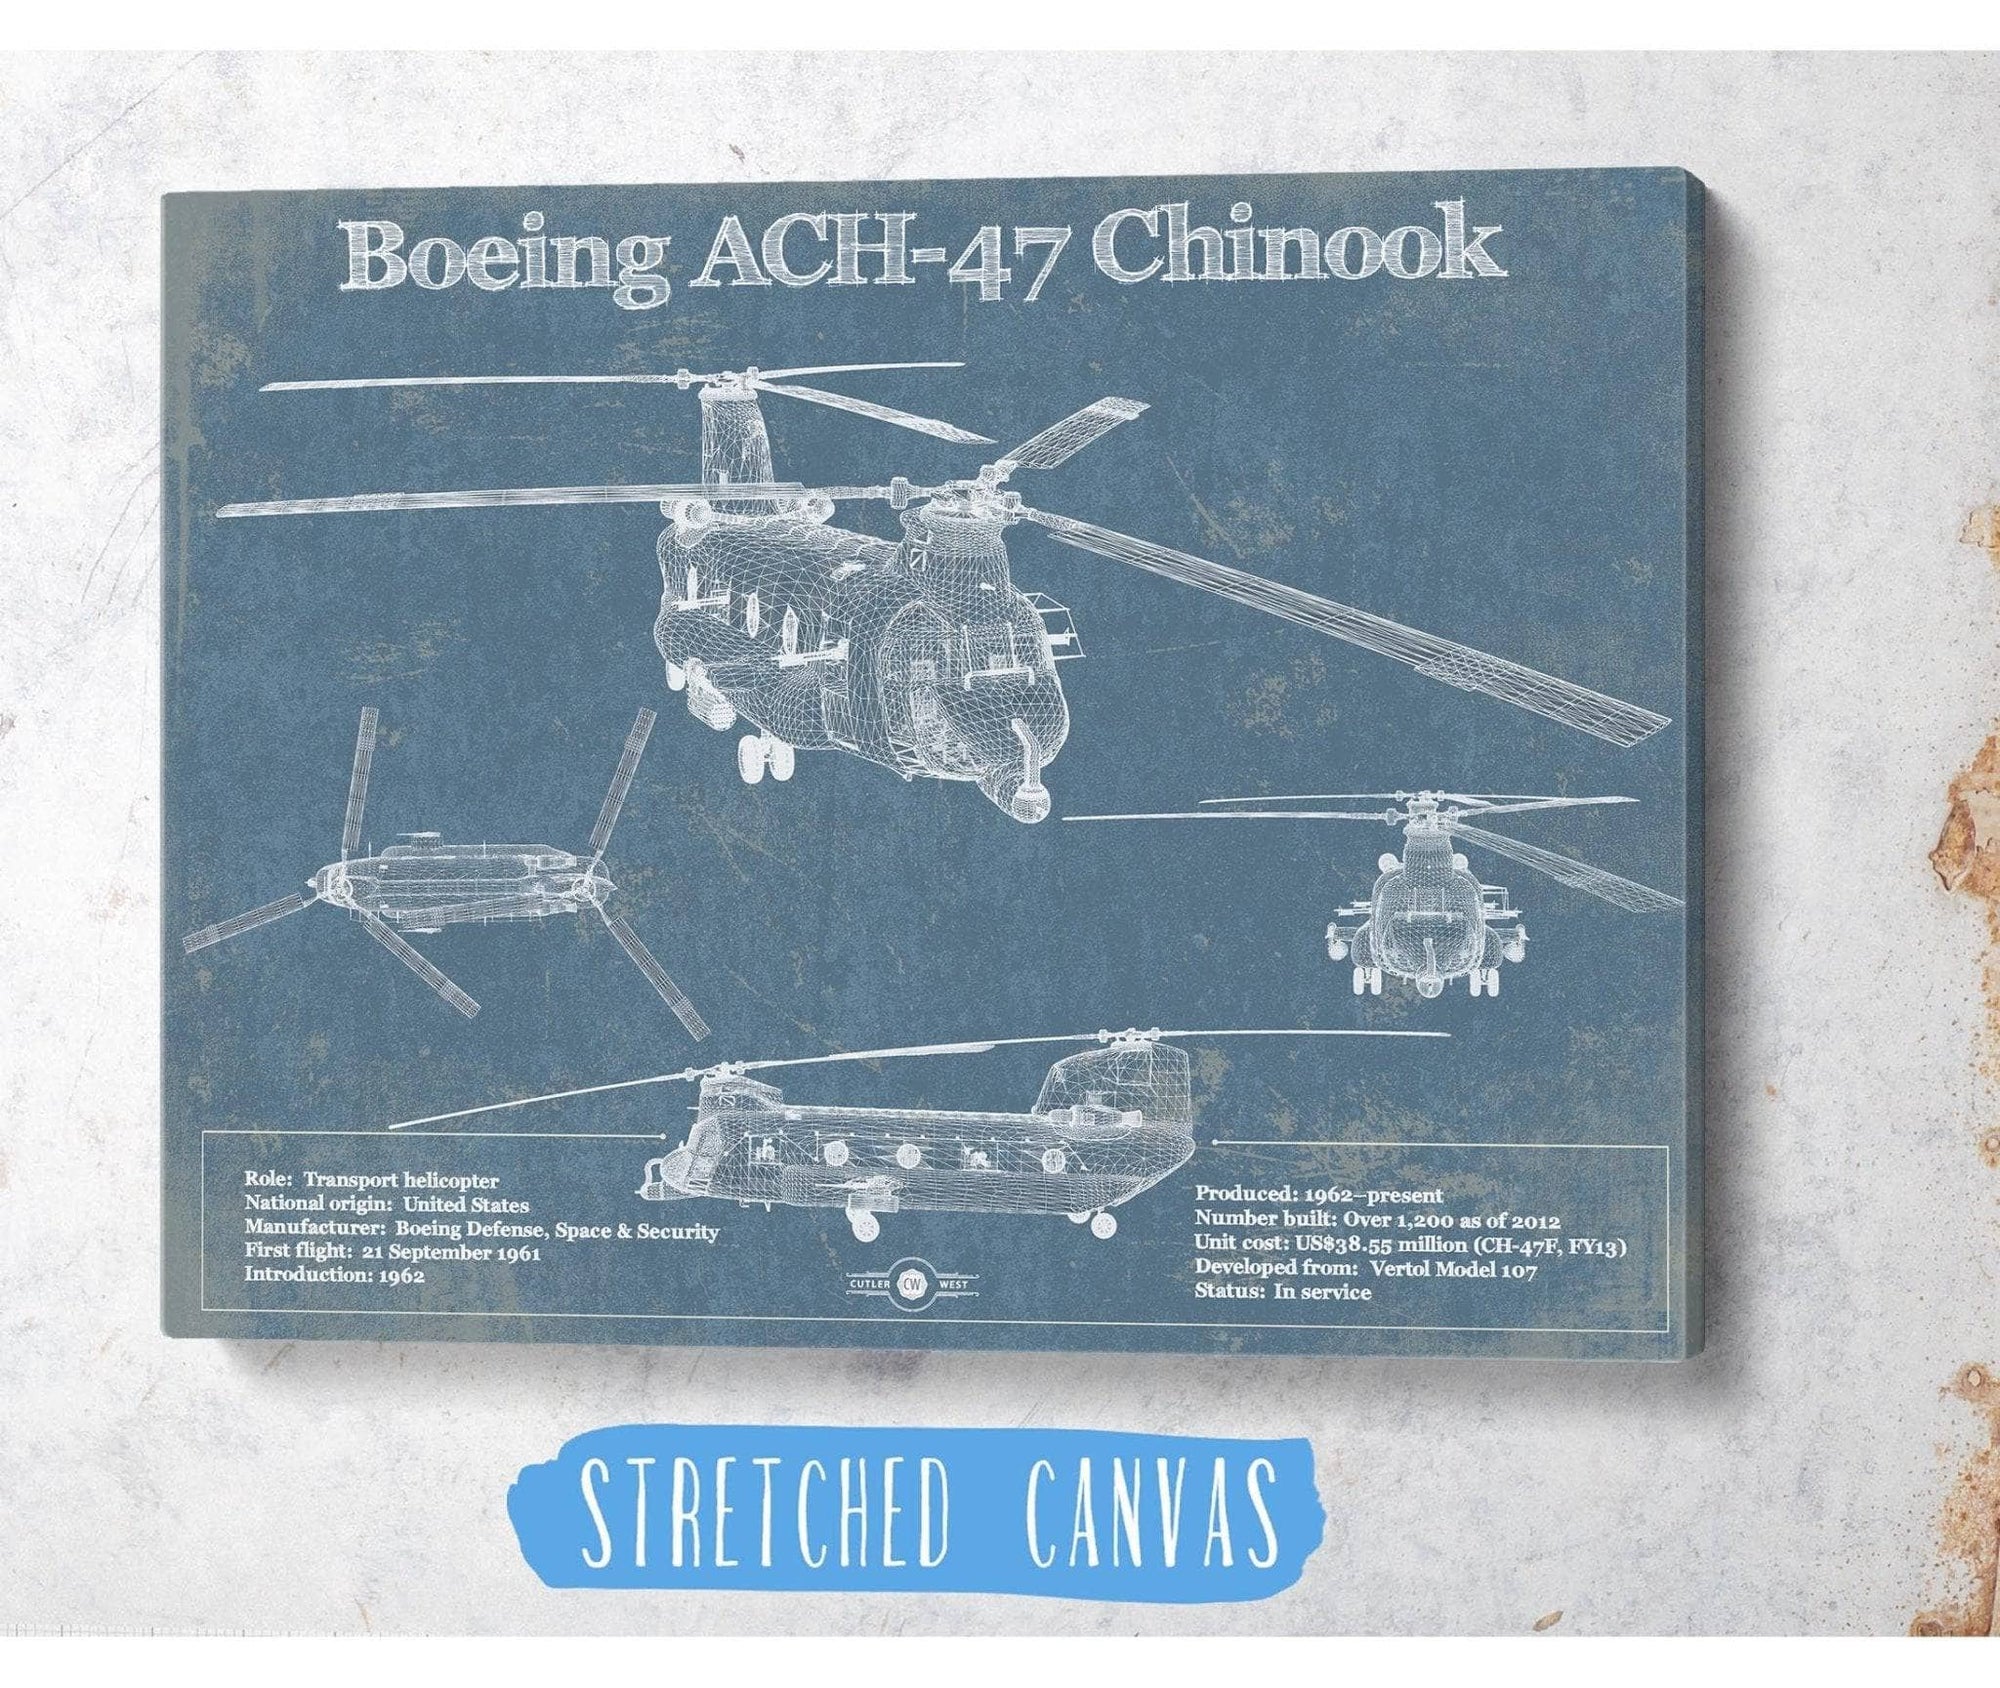 Cutler West Military Aircraft Boeing CH-47 Chinook Helicopter Vintage Aviation Blueprint Military Print - Custom Pilot Name Can Be Added